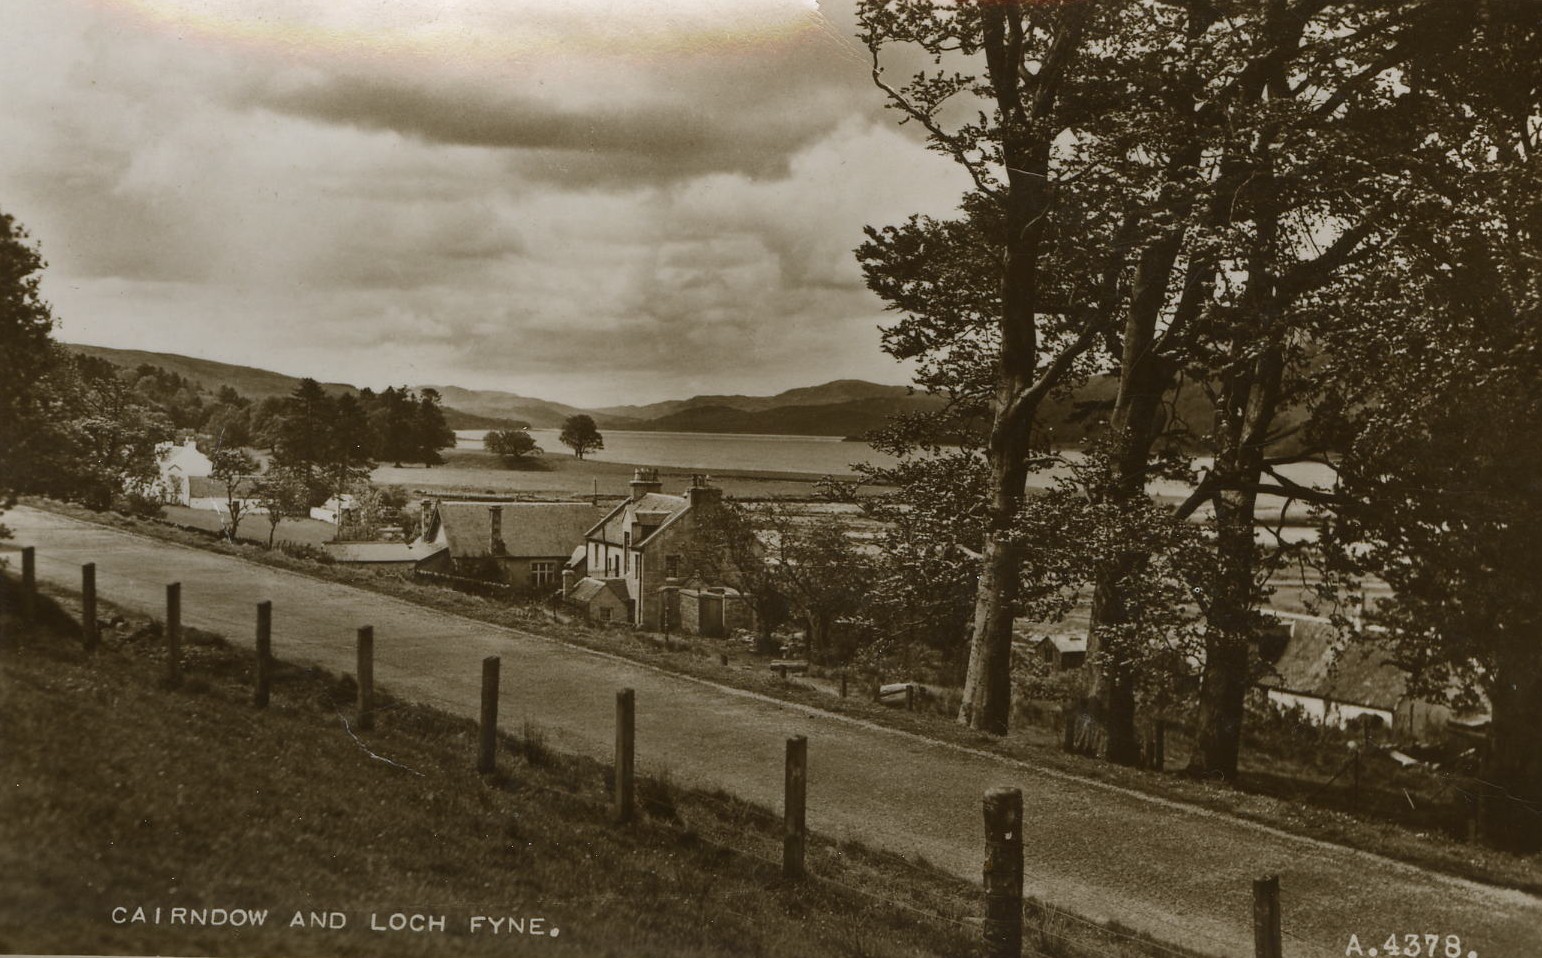 Kilmorich School & Cairndow Hotel from the high road